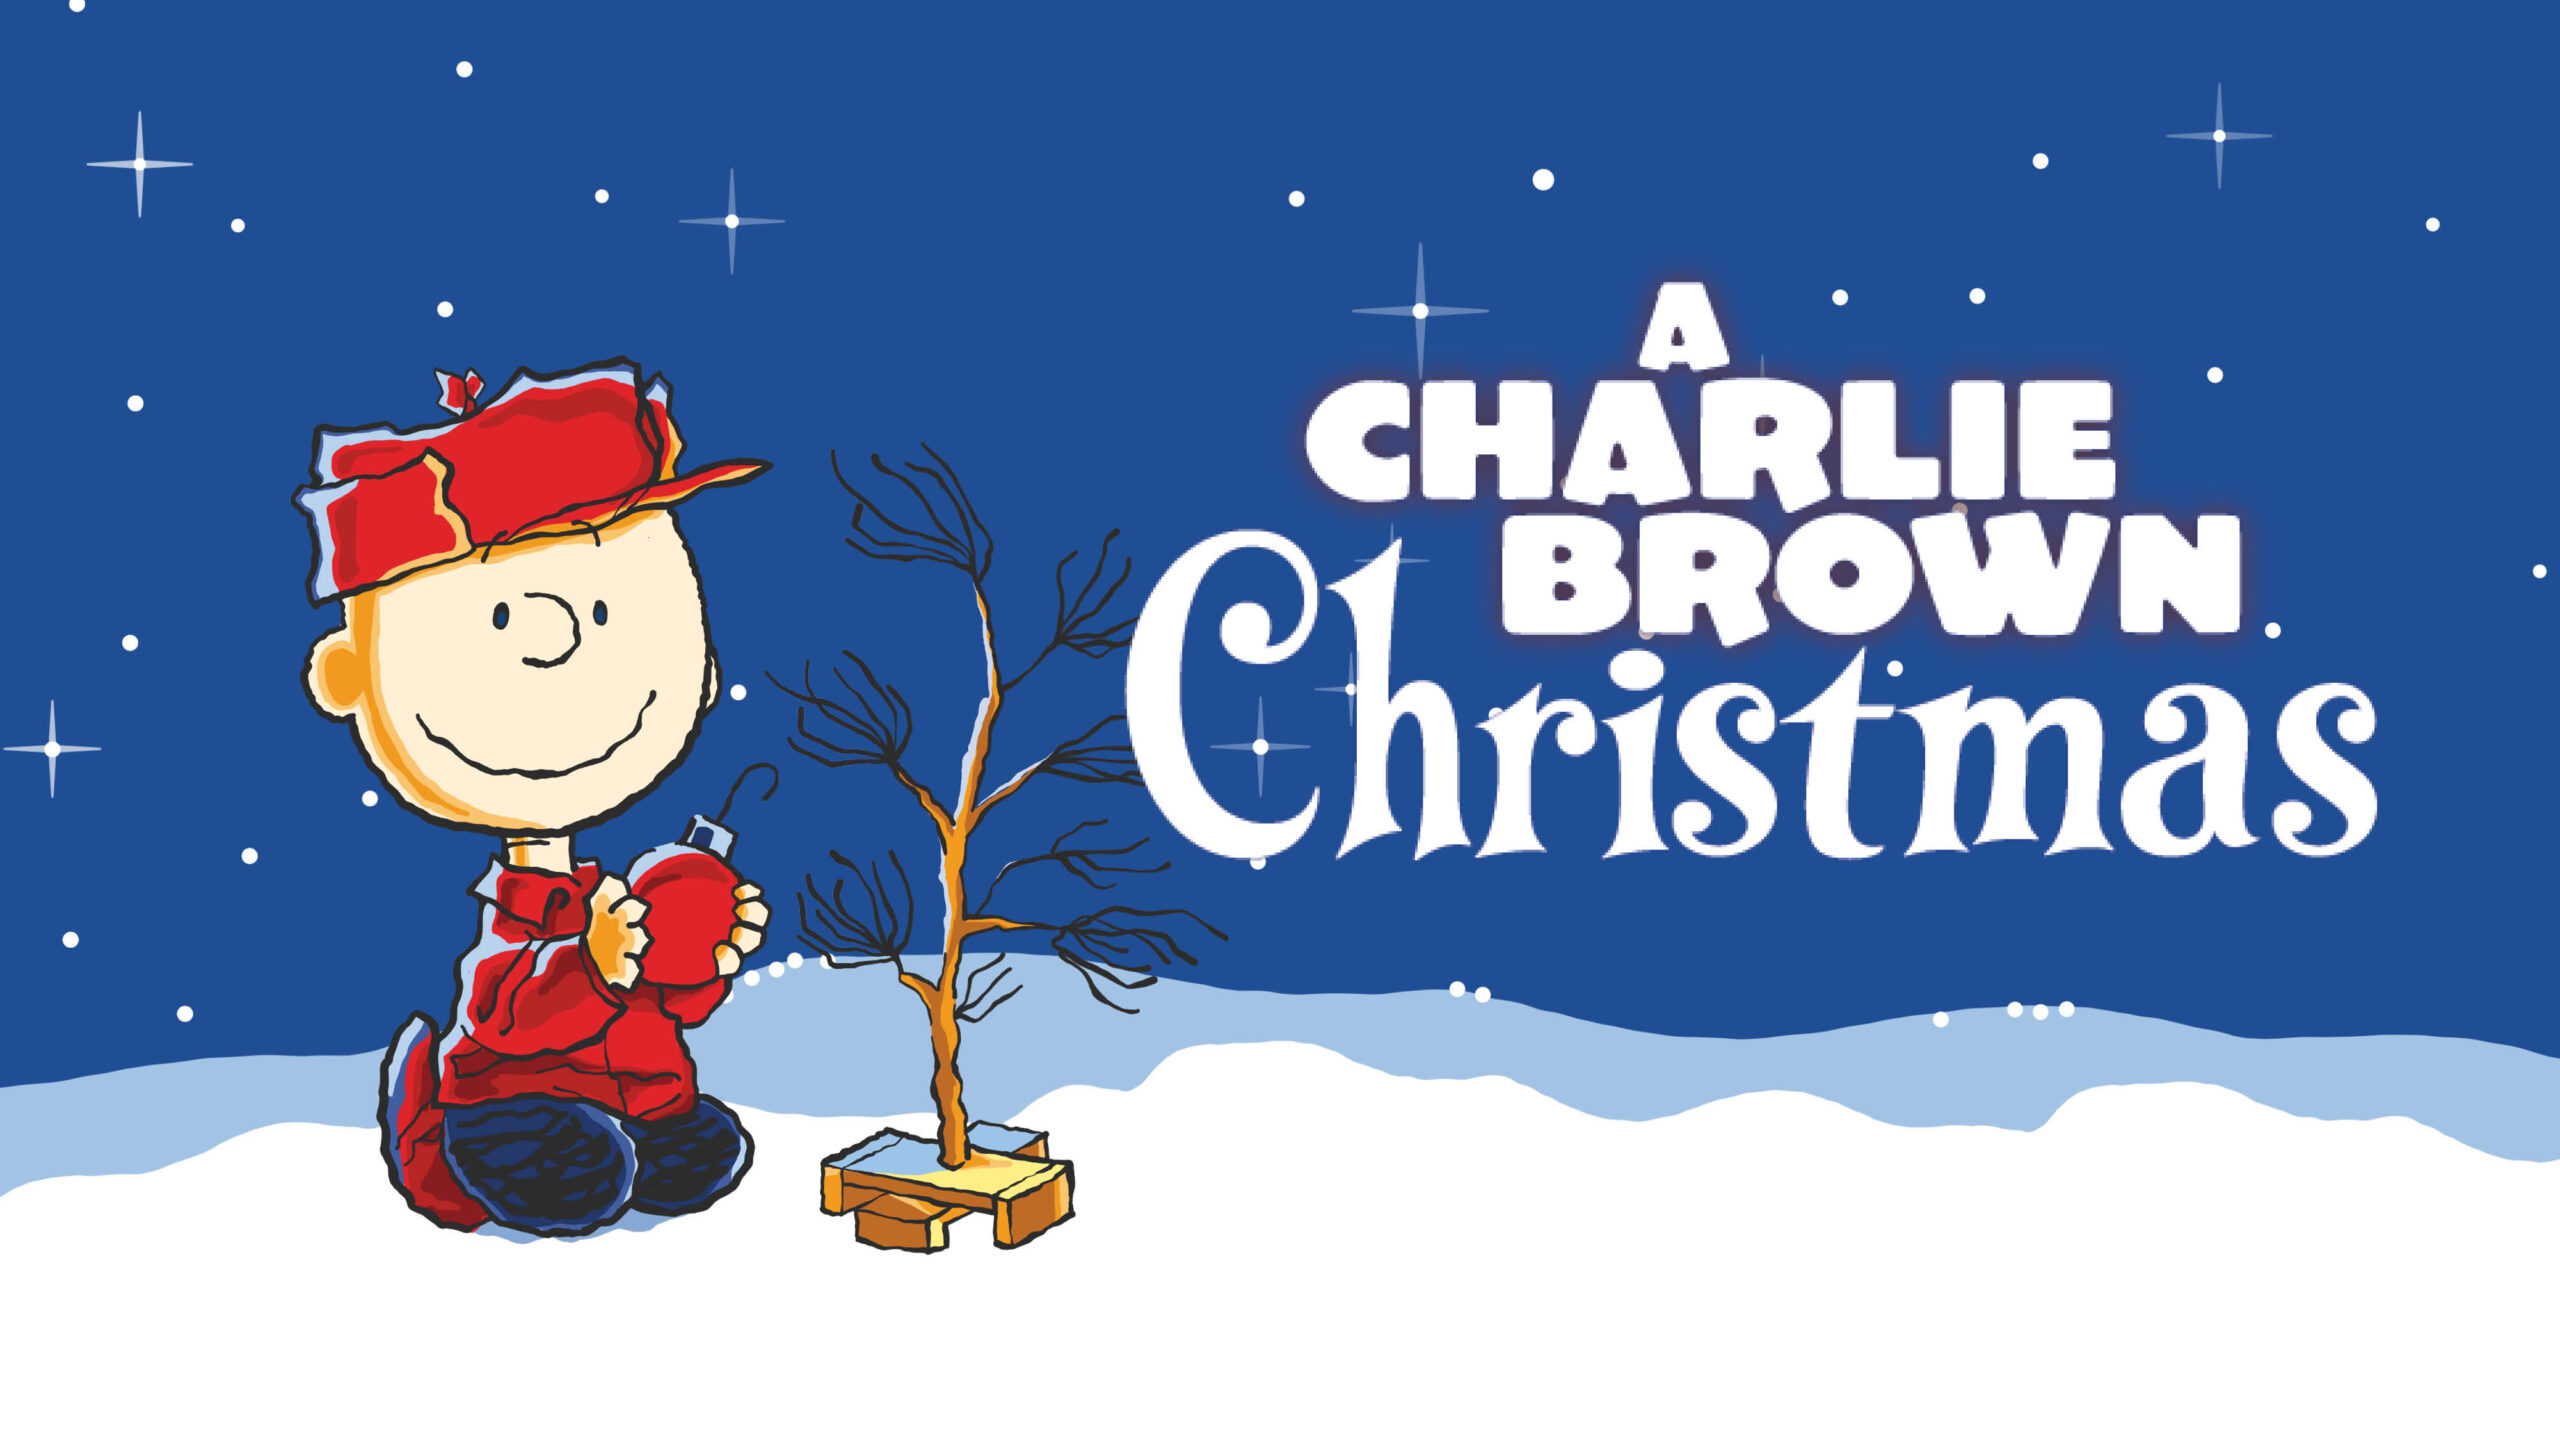 A Charlie Brown Christmas - Des Moines Playhouse